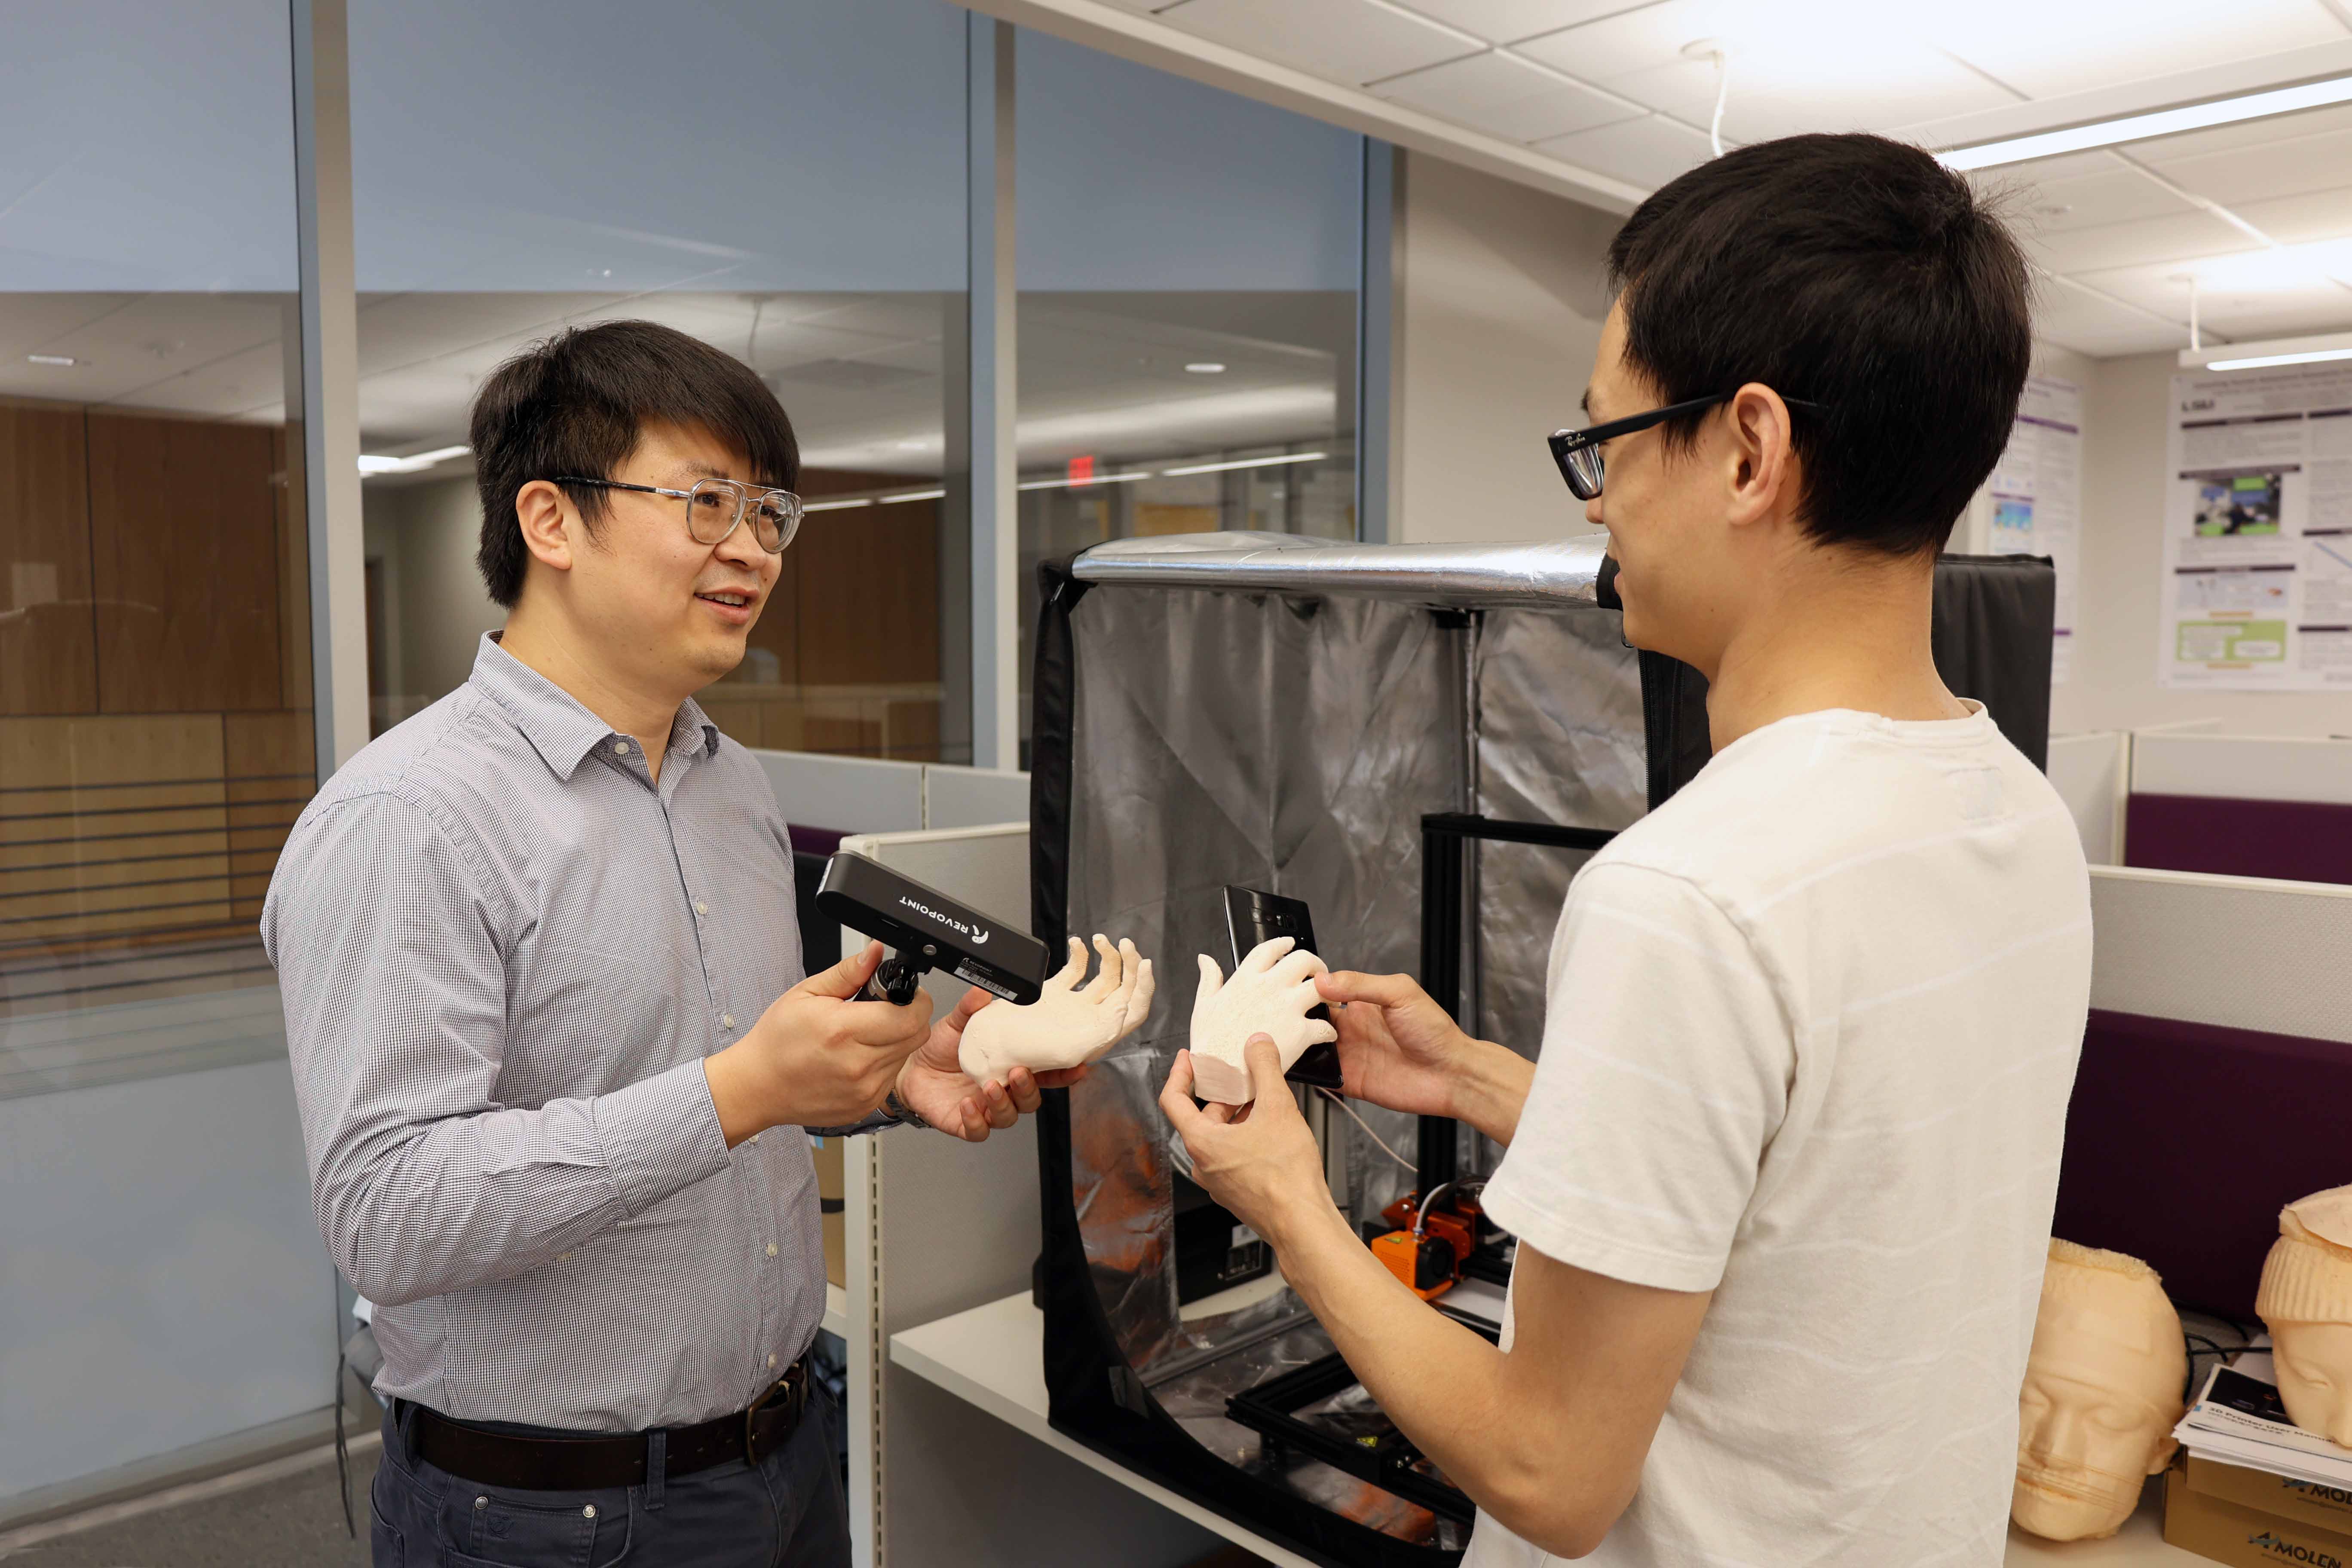 Image of Dr. Chen Wang with student in lab.